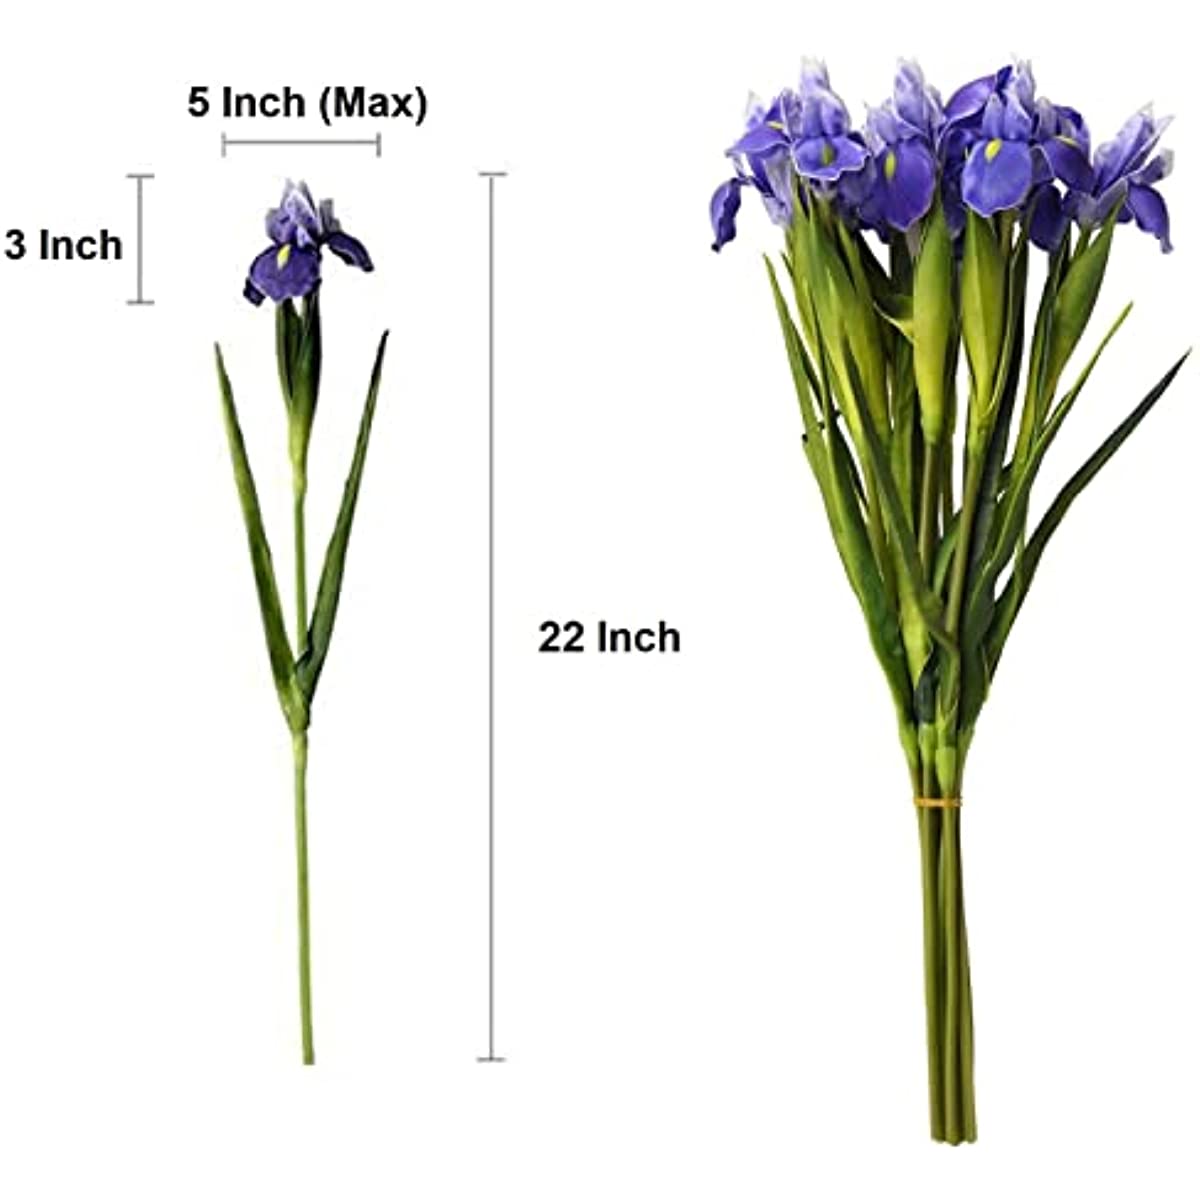 Artificial Iris Flower Real Touch Long Stem Artificial Lifelike Siberian Iris Plants For Home Wedding Party Decora Office Table Decora Bedroom Dinning Room Decora